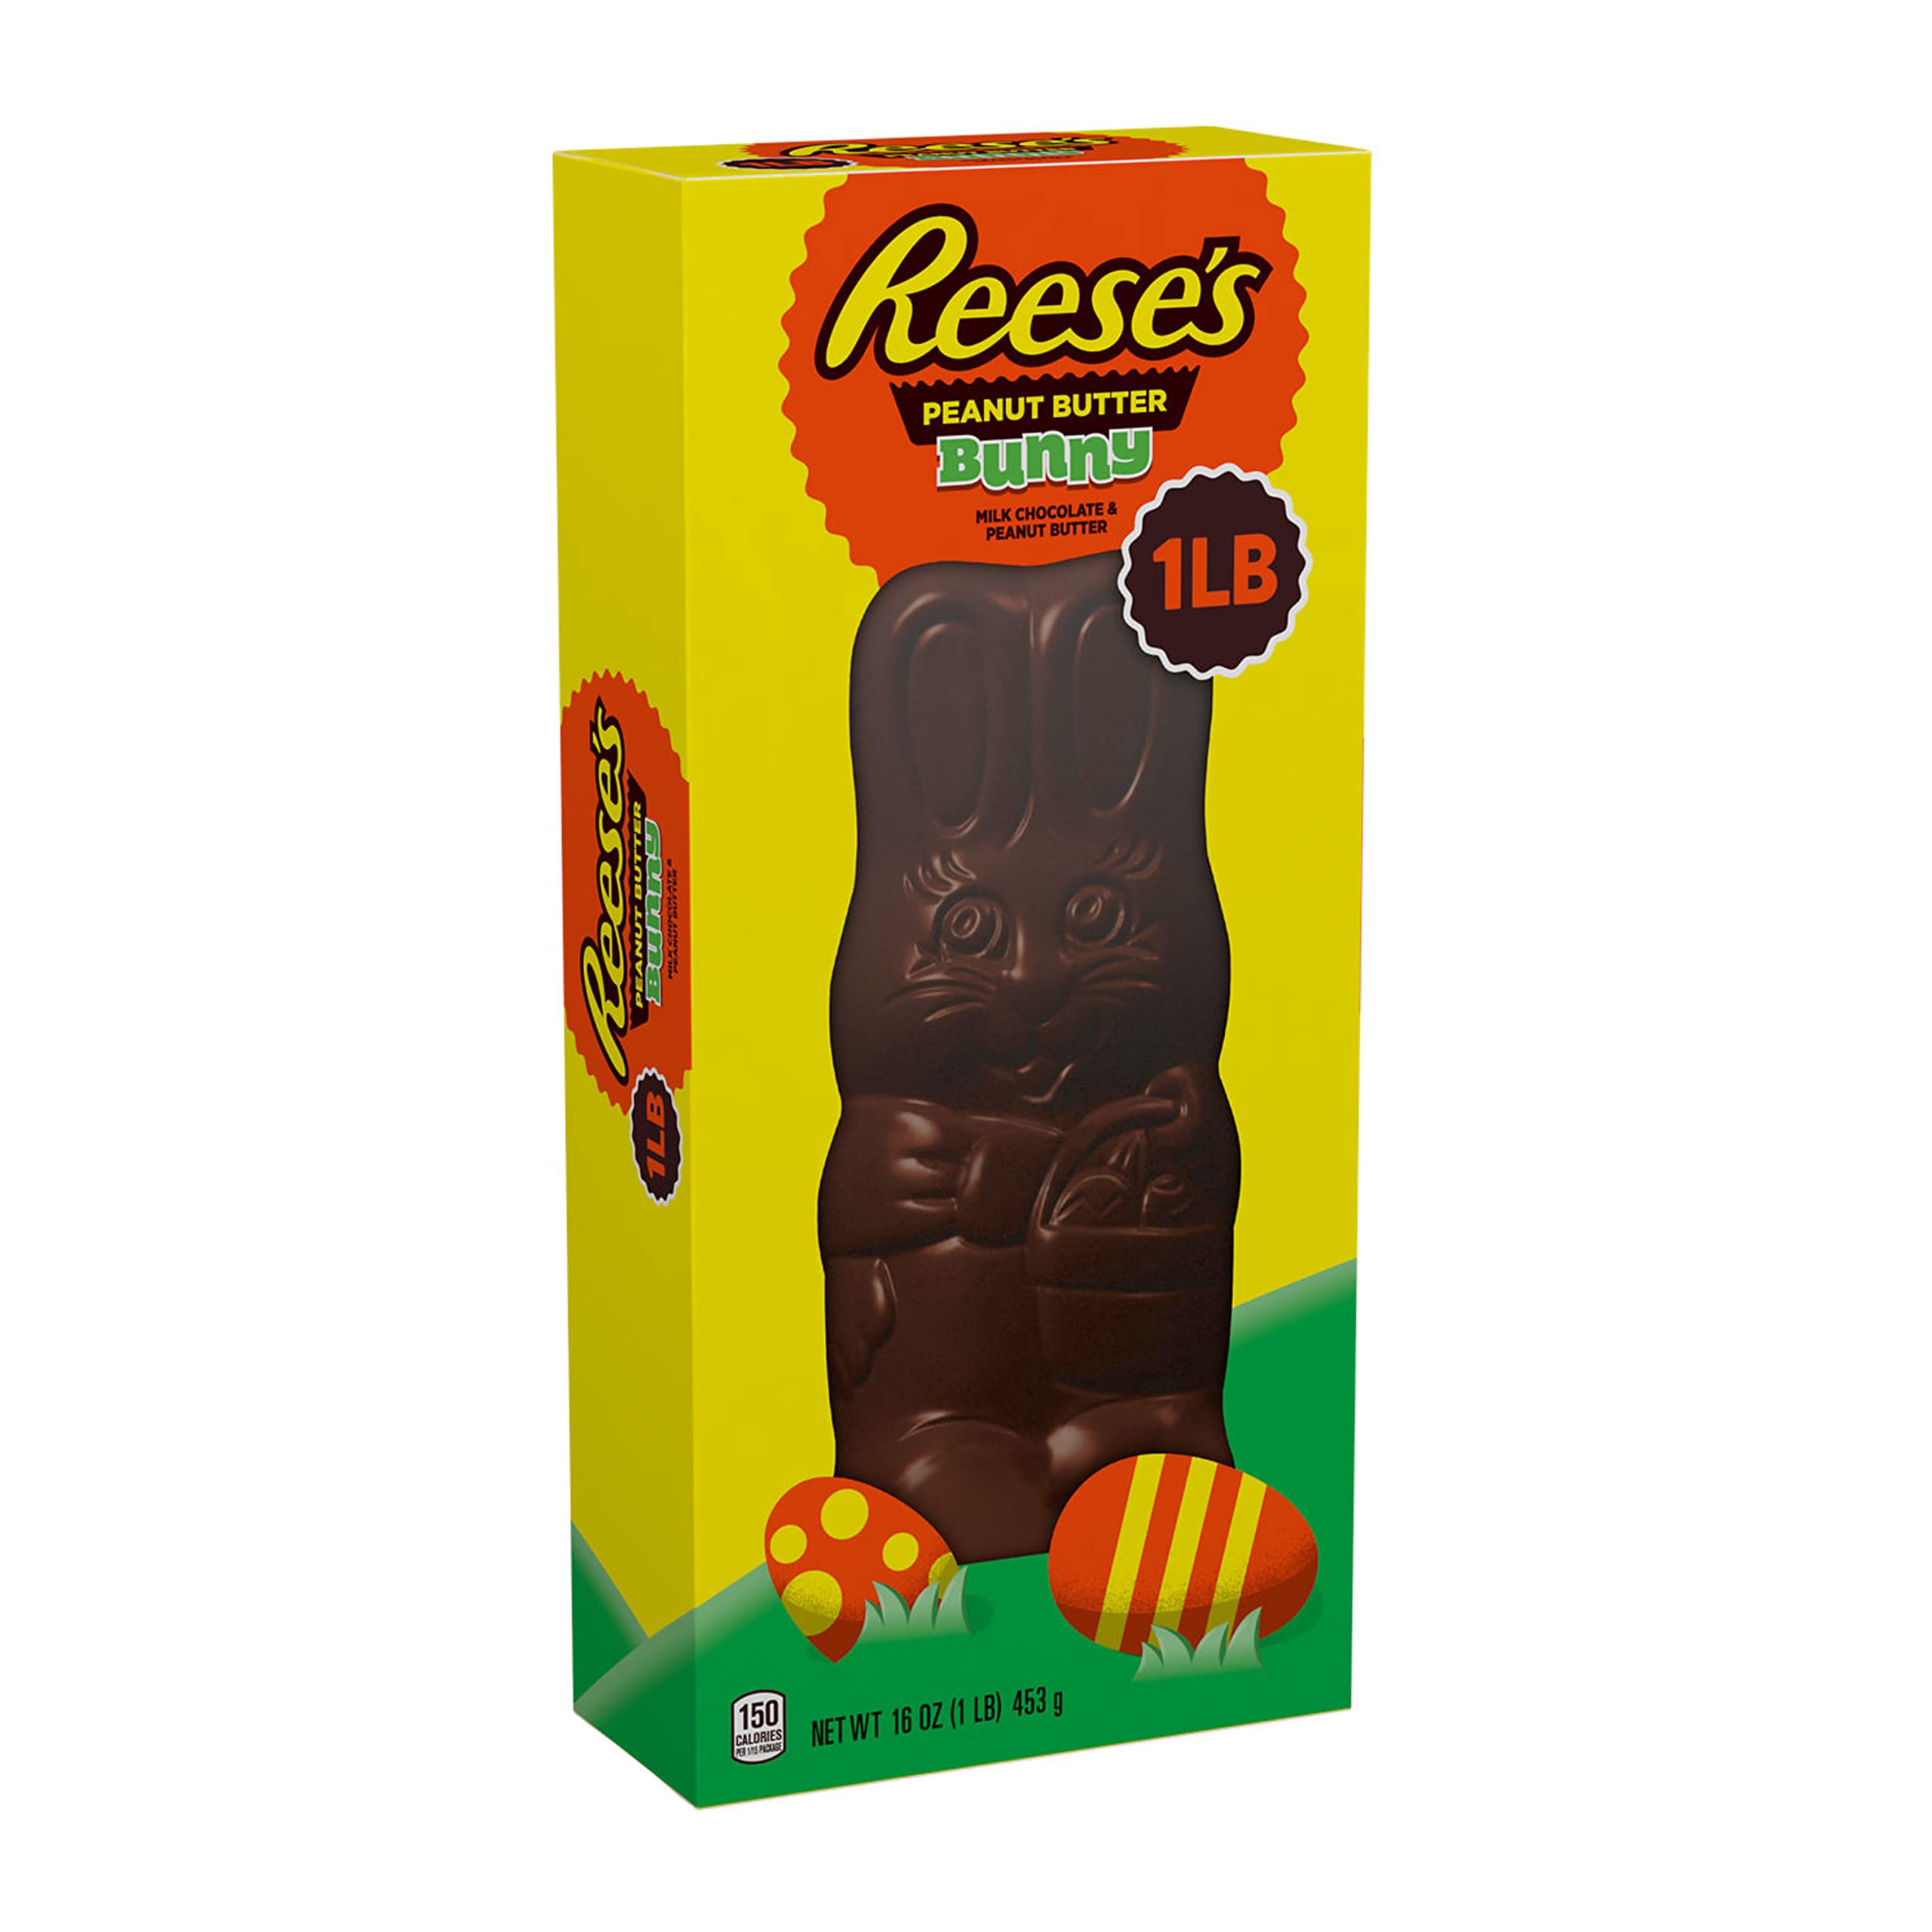 REESE'S BUNNY Milk Chocolate Peanut Butter, Easter Basket Easter Candy Gift Box, 1 lb